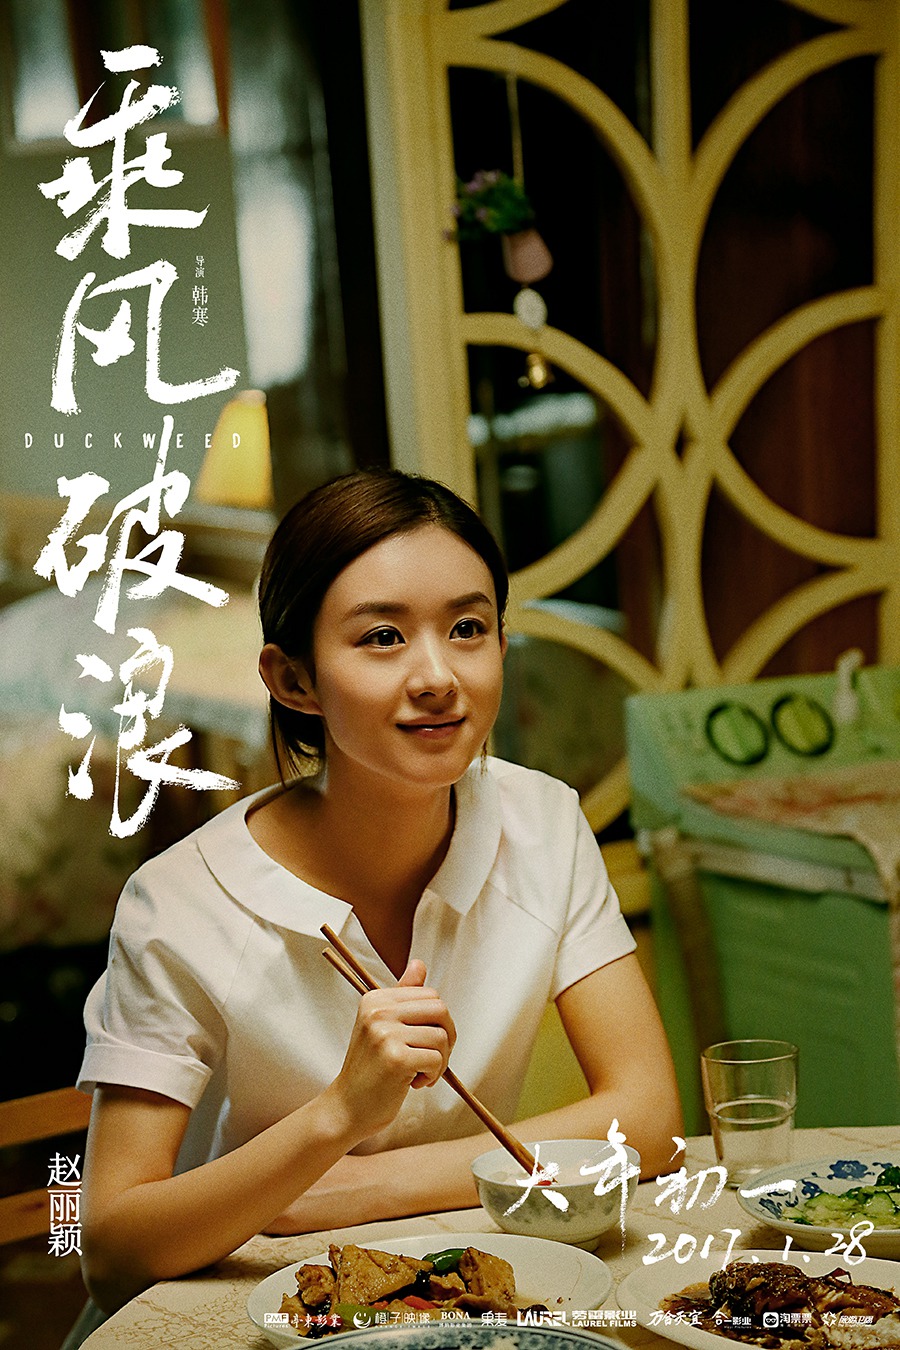 Extra Large Movie Poster Image for Cheng feng po lang (#6 of 13)